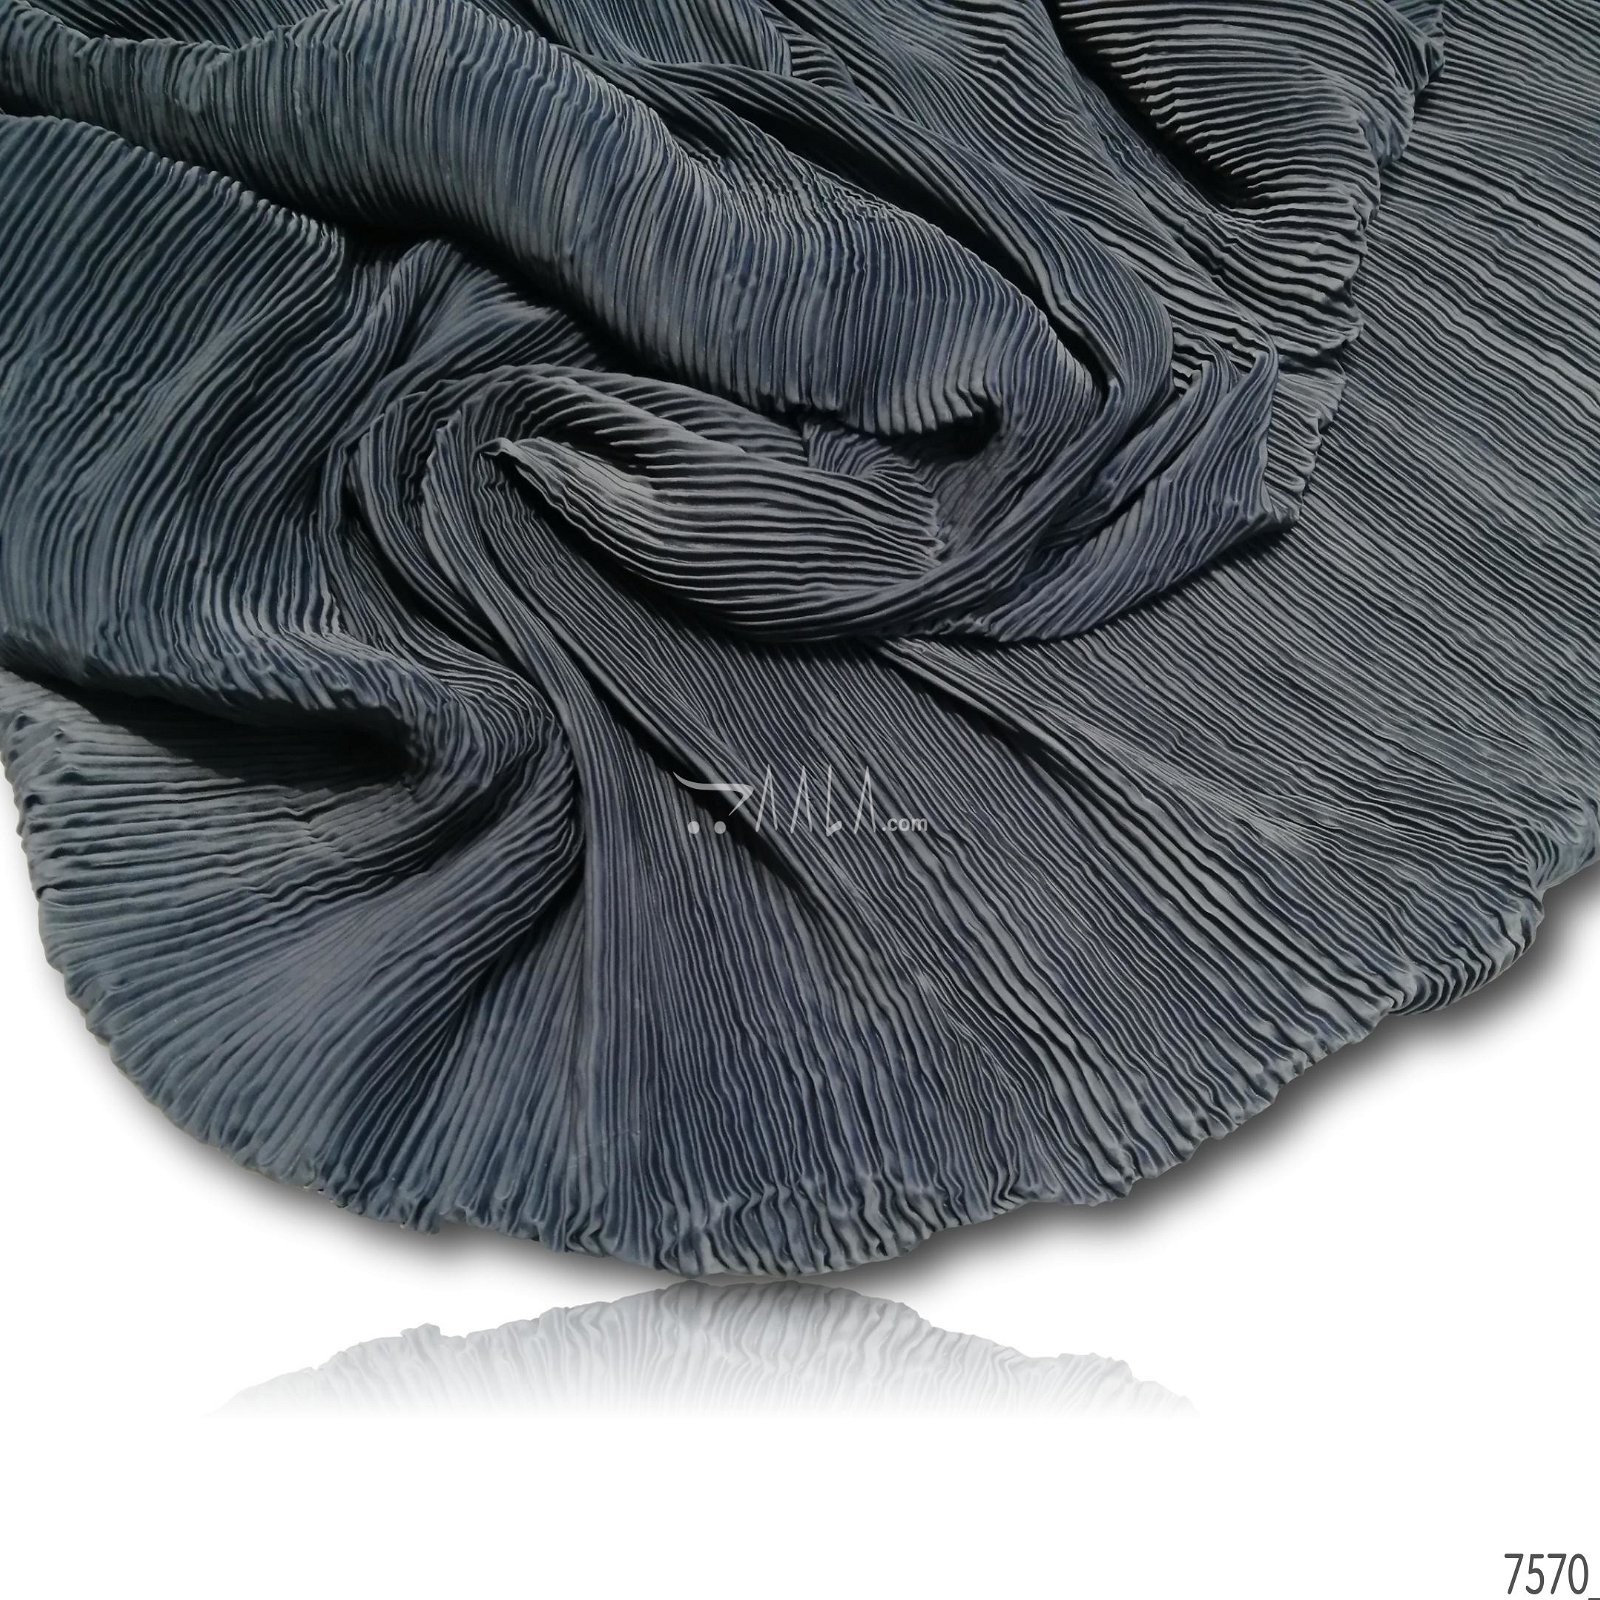 Pleated Satin-Georgette Poly-ester 44-Inches GREY Per-Metre #7570
